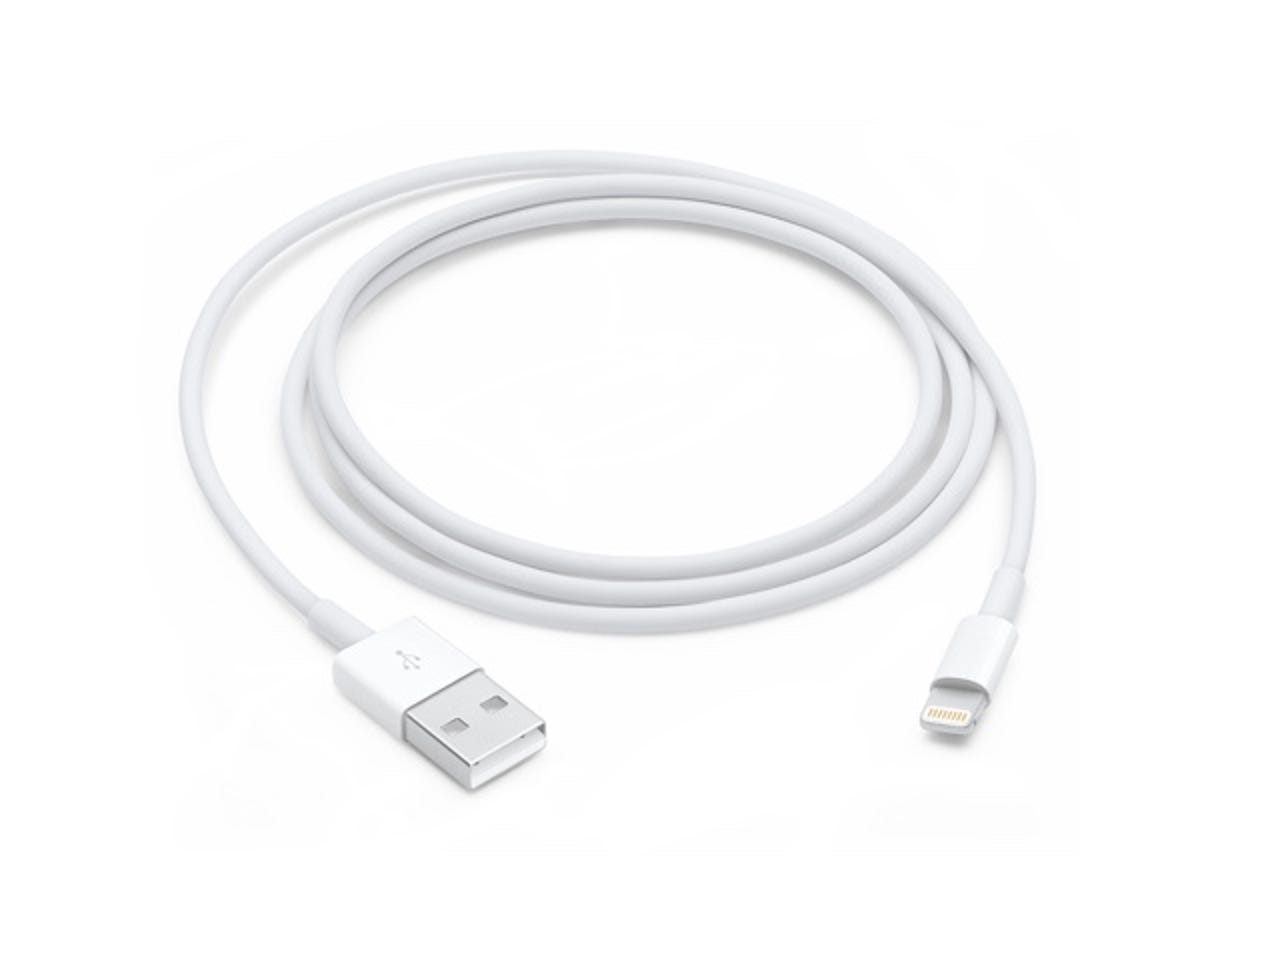 Apple Lightning cable